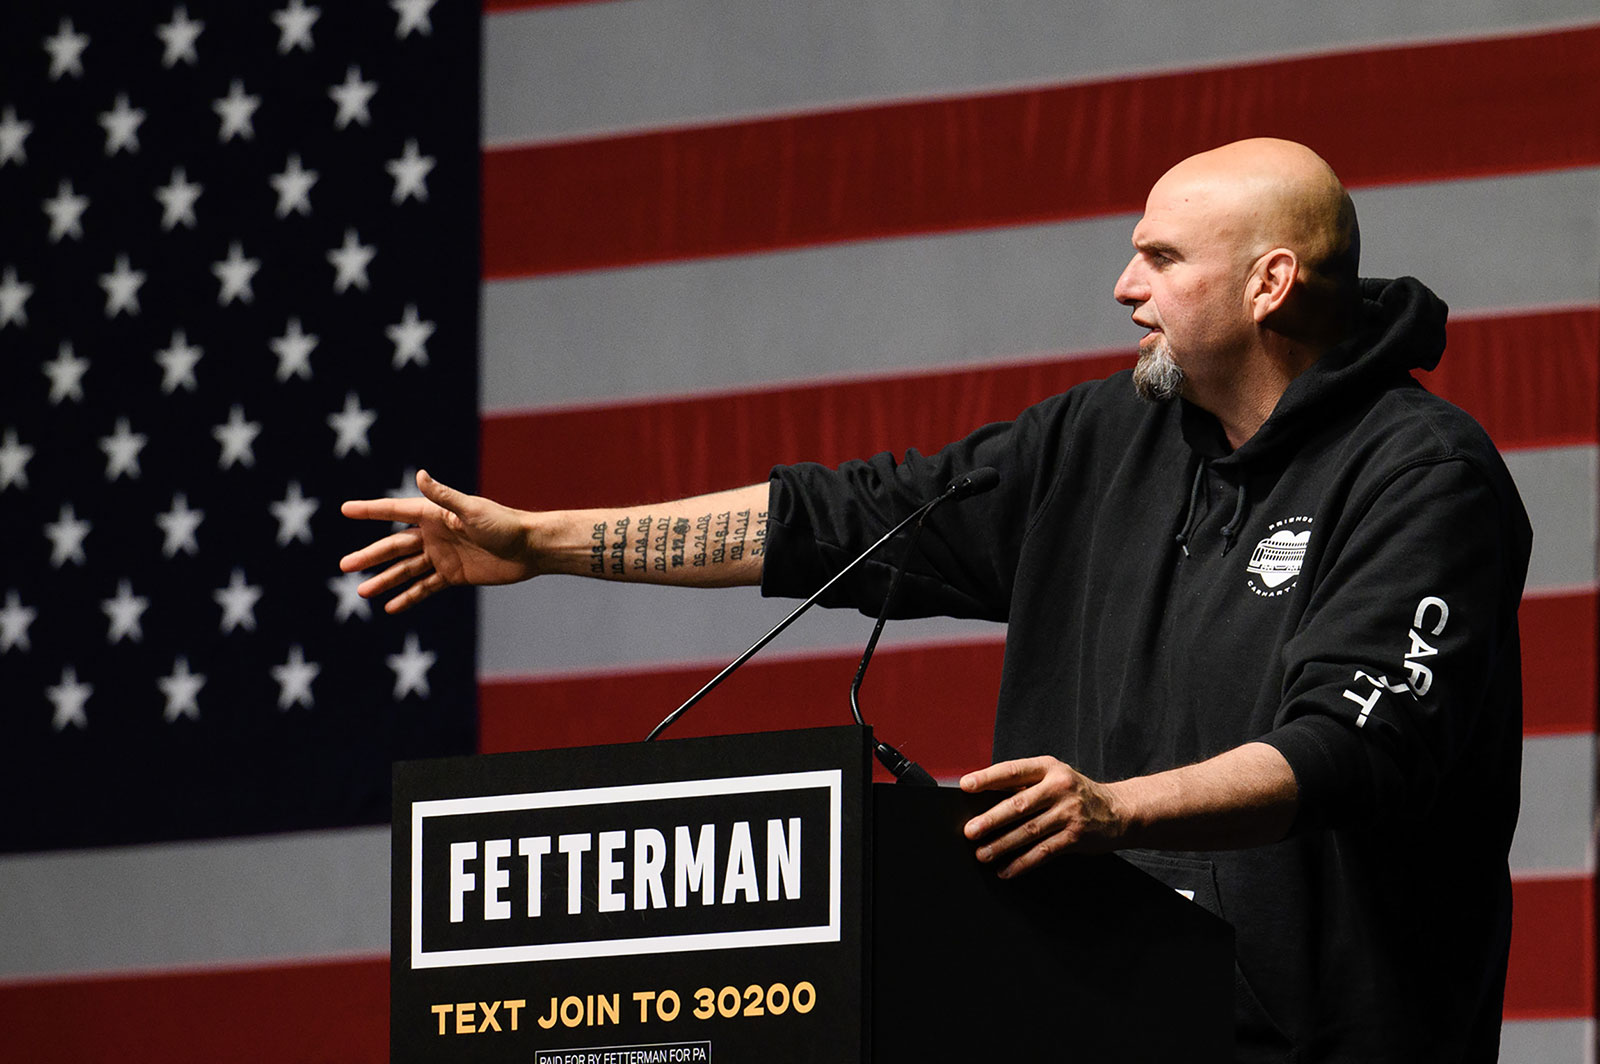 Pennsylvania Senate candidate John Fetterman addresses supporters at his election night party in Pittsburgh on Tuesday.